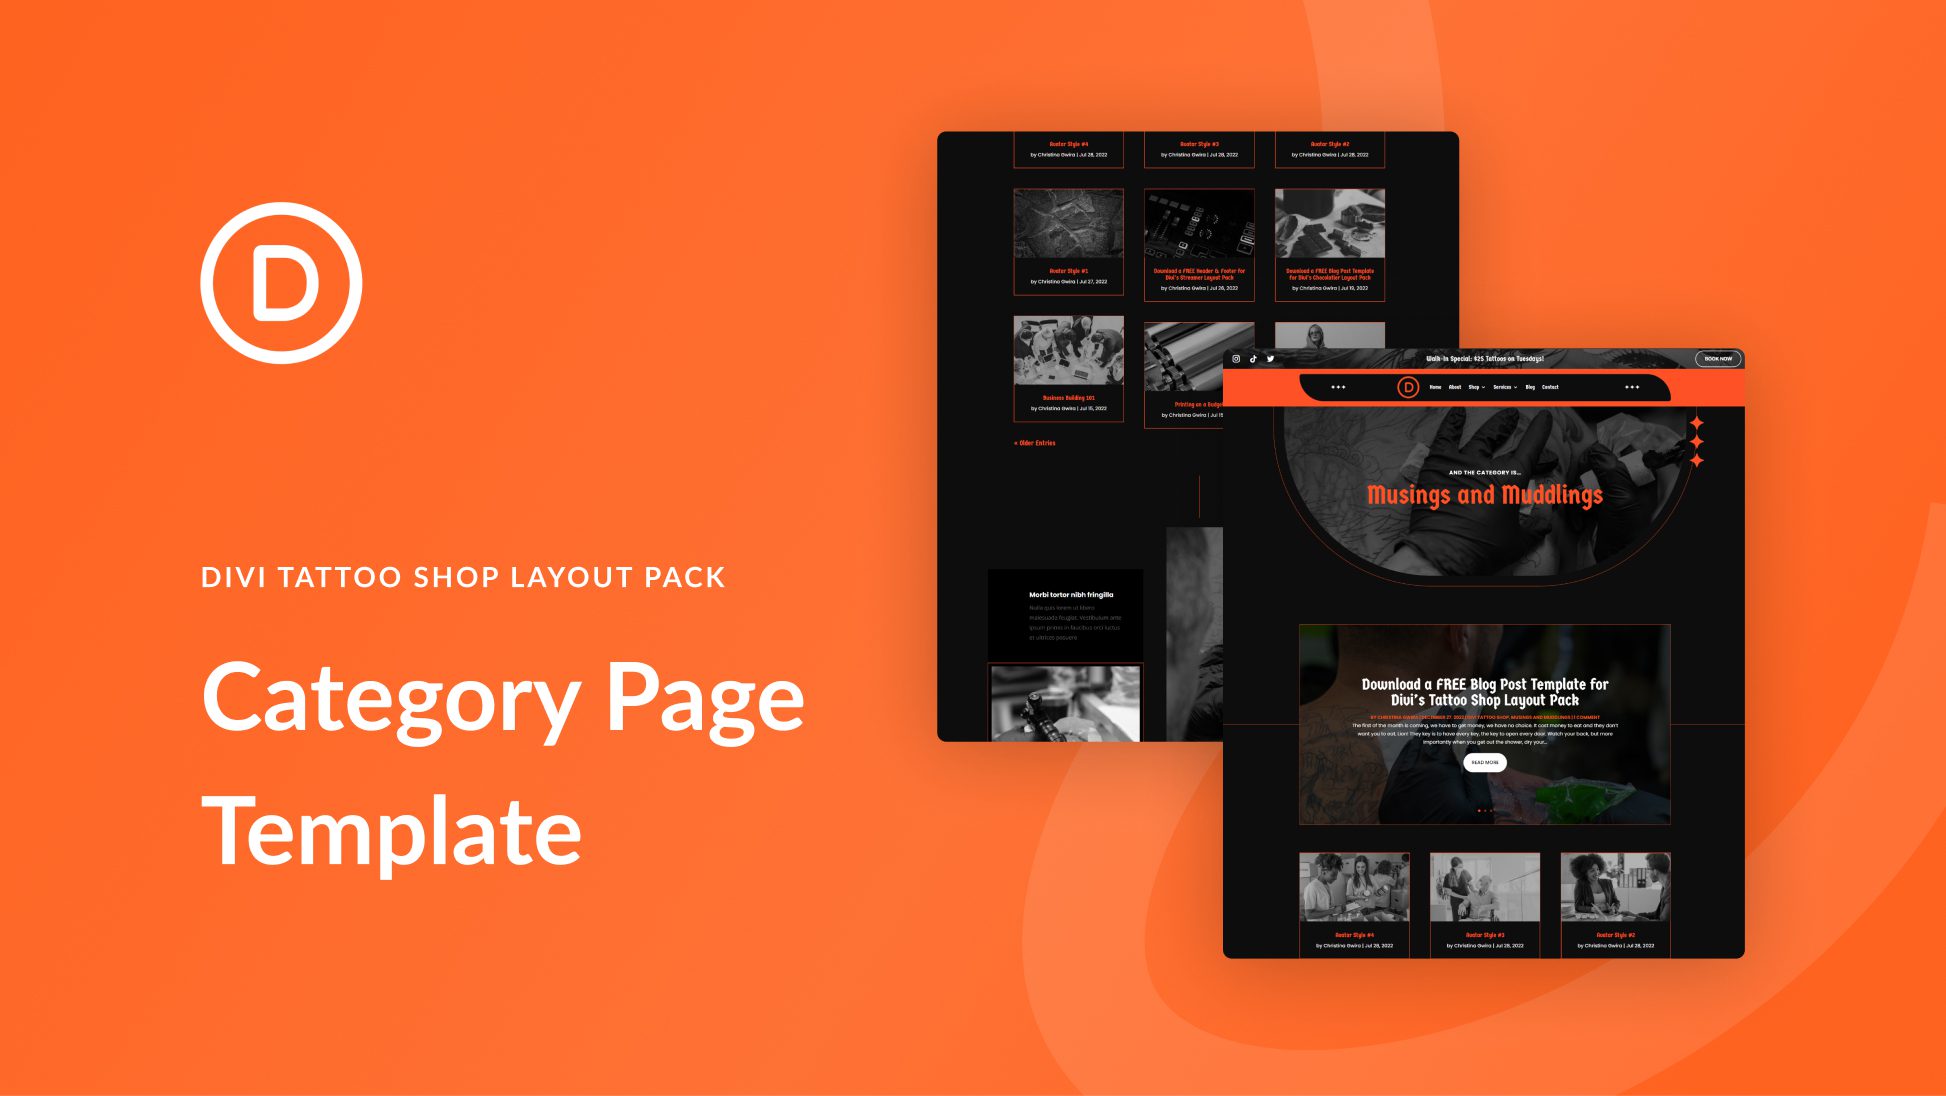 Download a FREE Category Page Template for Divi’s Tattoo Shop Layout Pack